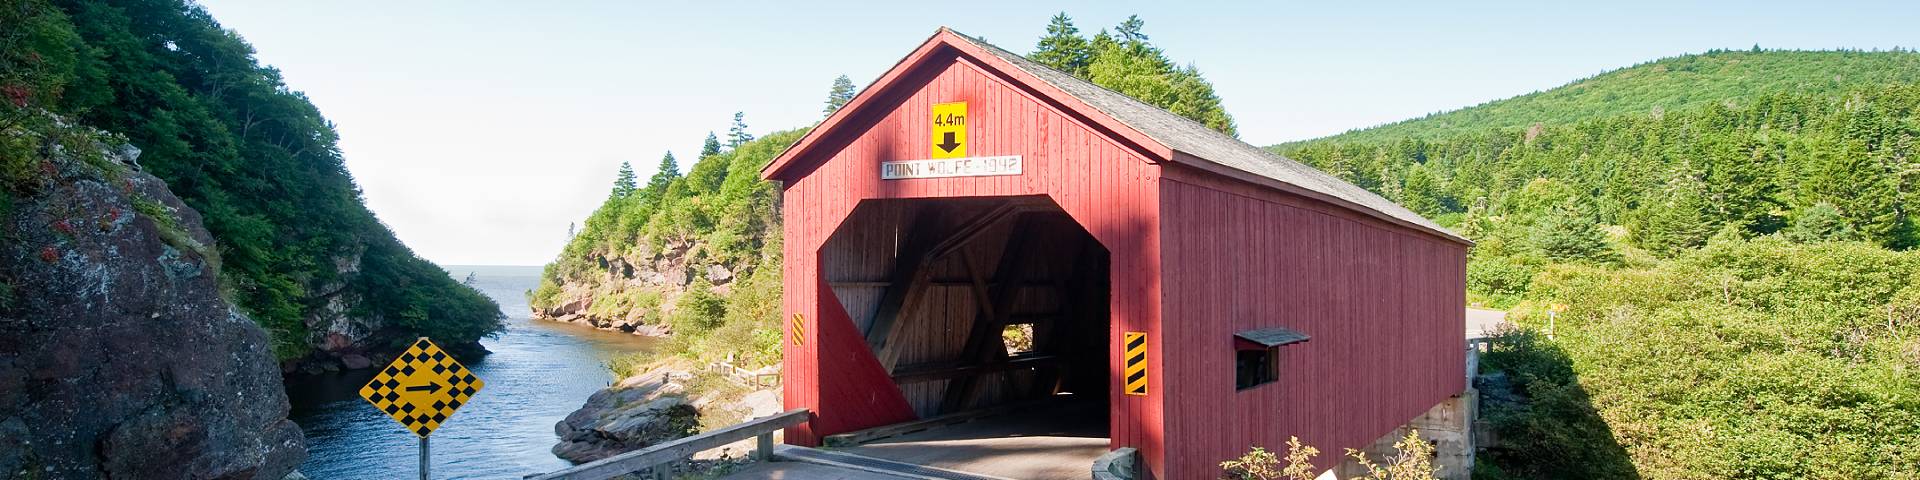 The Point Wolfe covered bridge